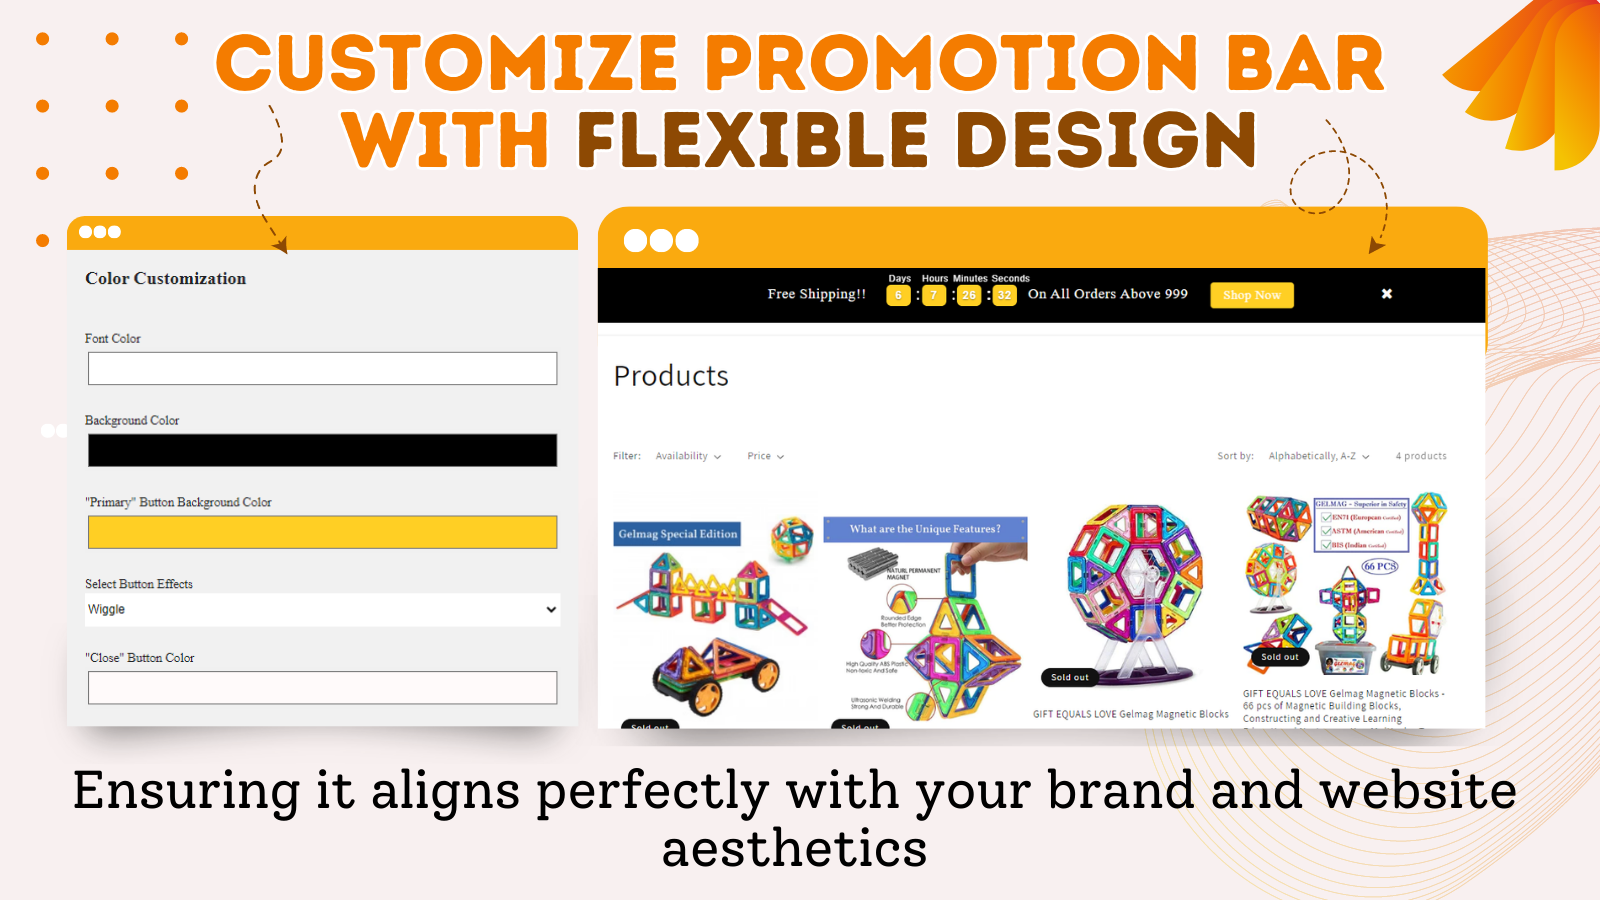 Customize Promotion Bar with Flexible Design